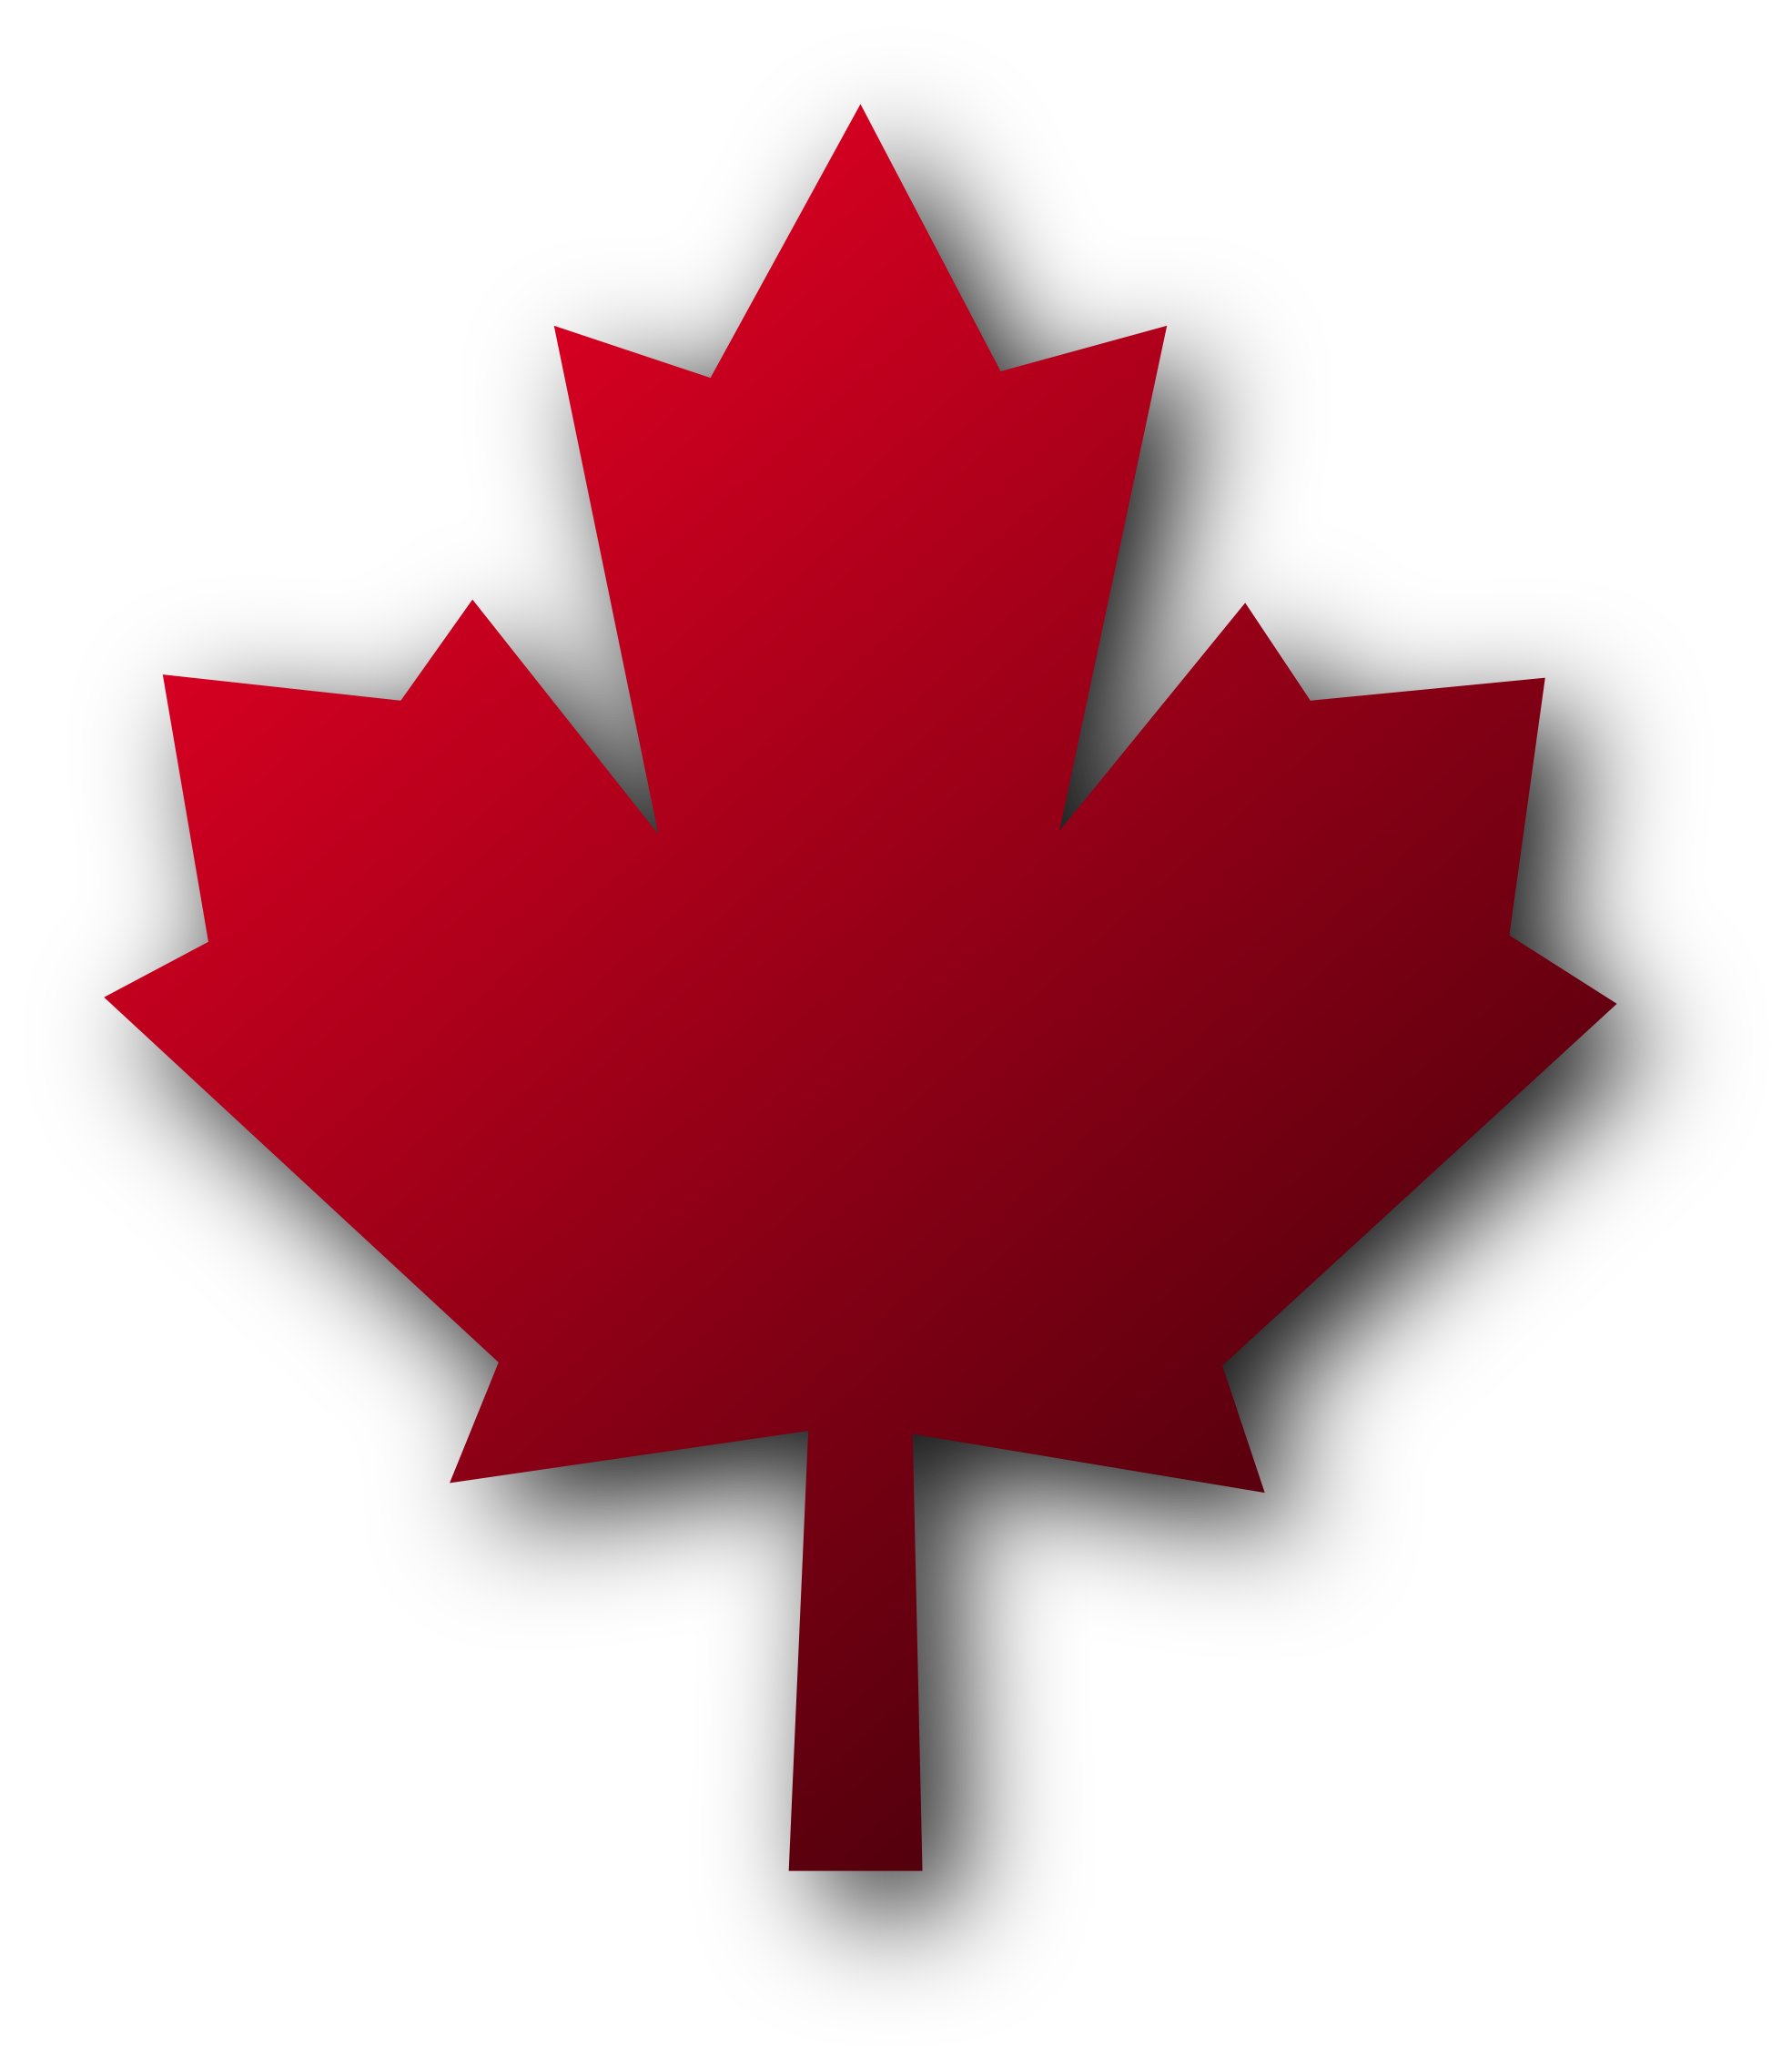 Maple leaf clipart free